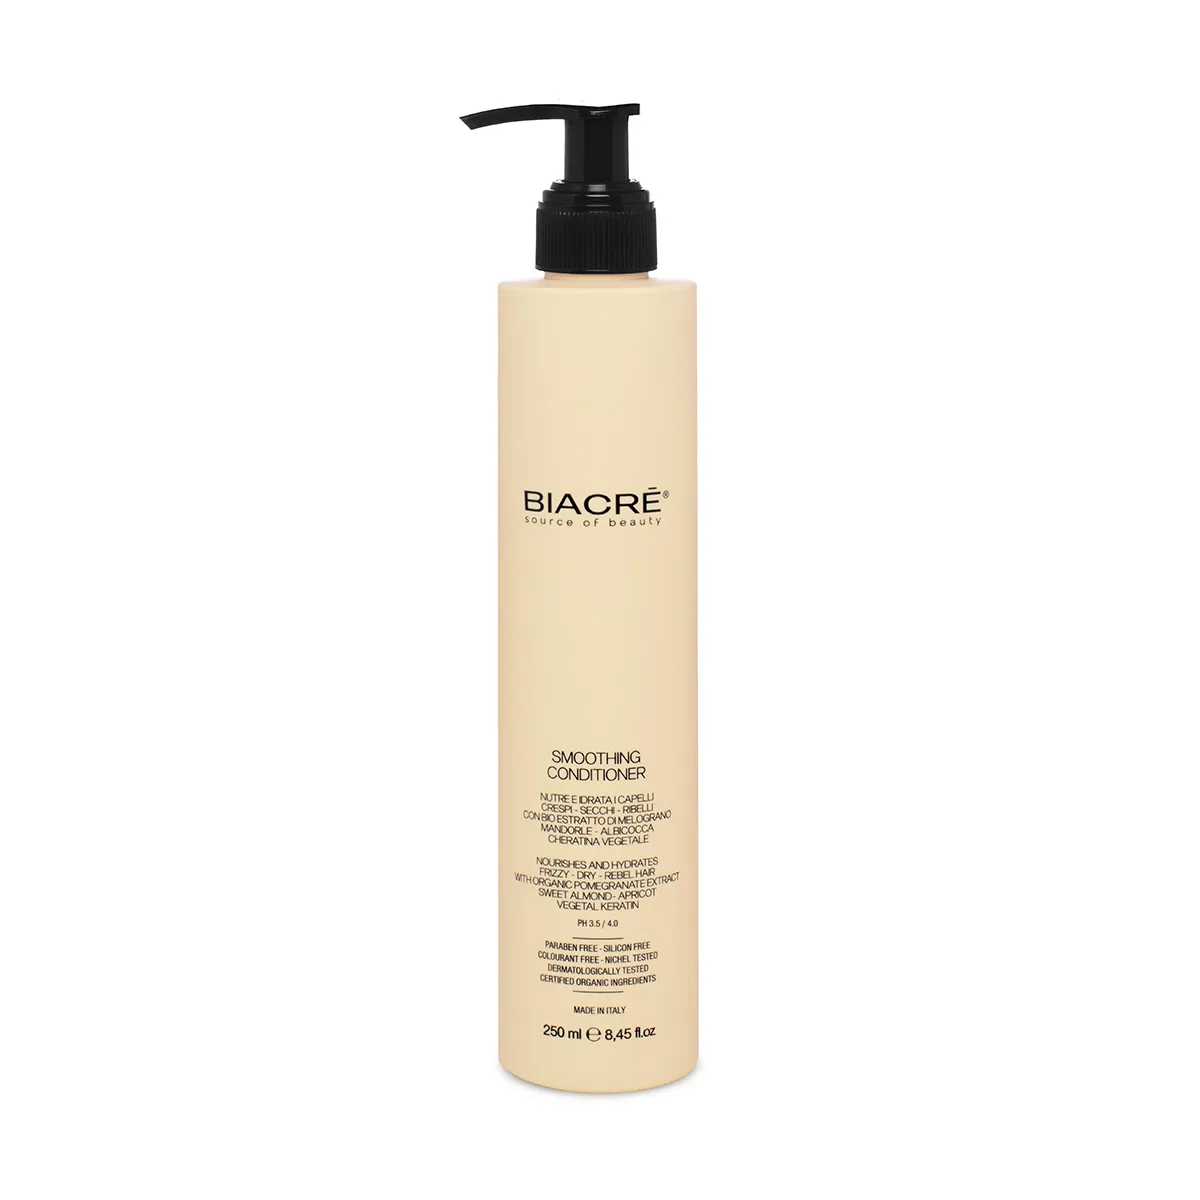 Biacrè Smoothing Conditioner siluv palsam 250ml